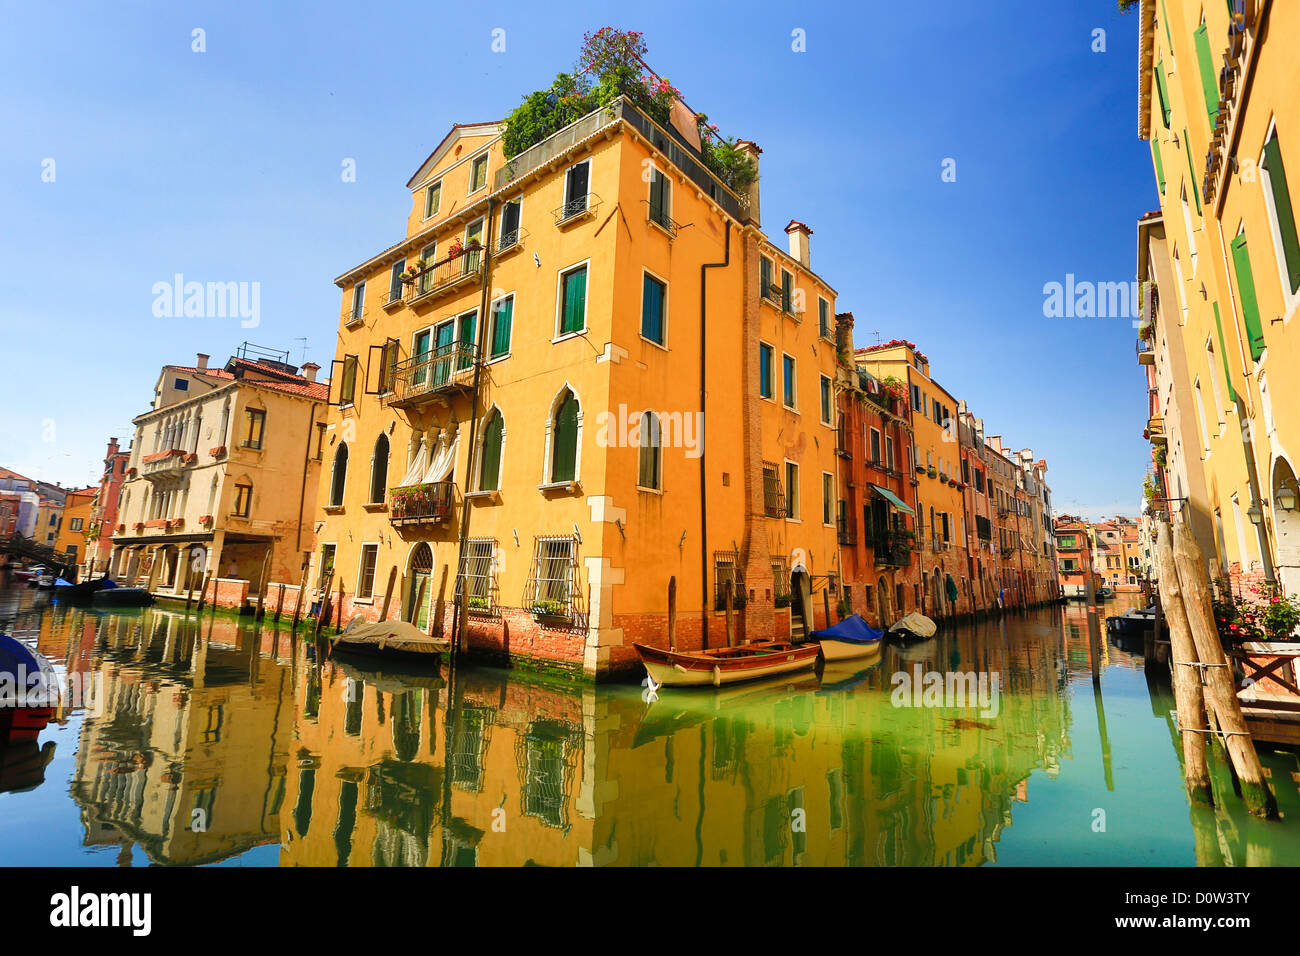 Italy, Europe, travel, Venice, houses, Italy, Europe, travel, canal, colourful, reflection, tourism, Unesco, Venice Stock Photo